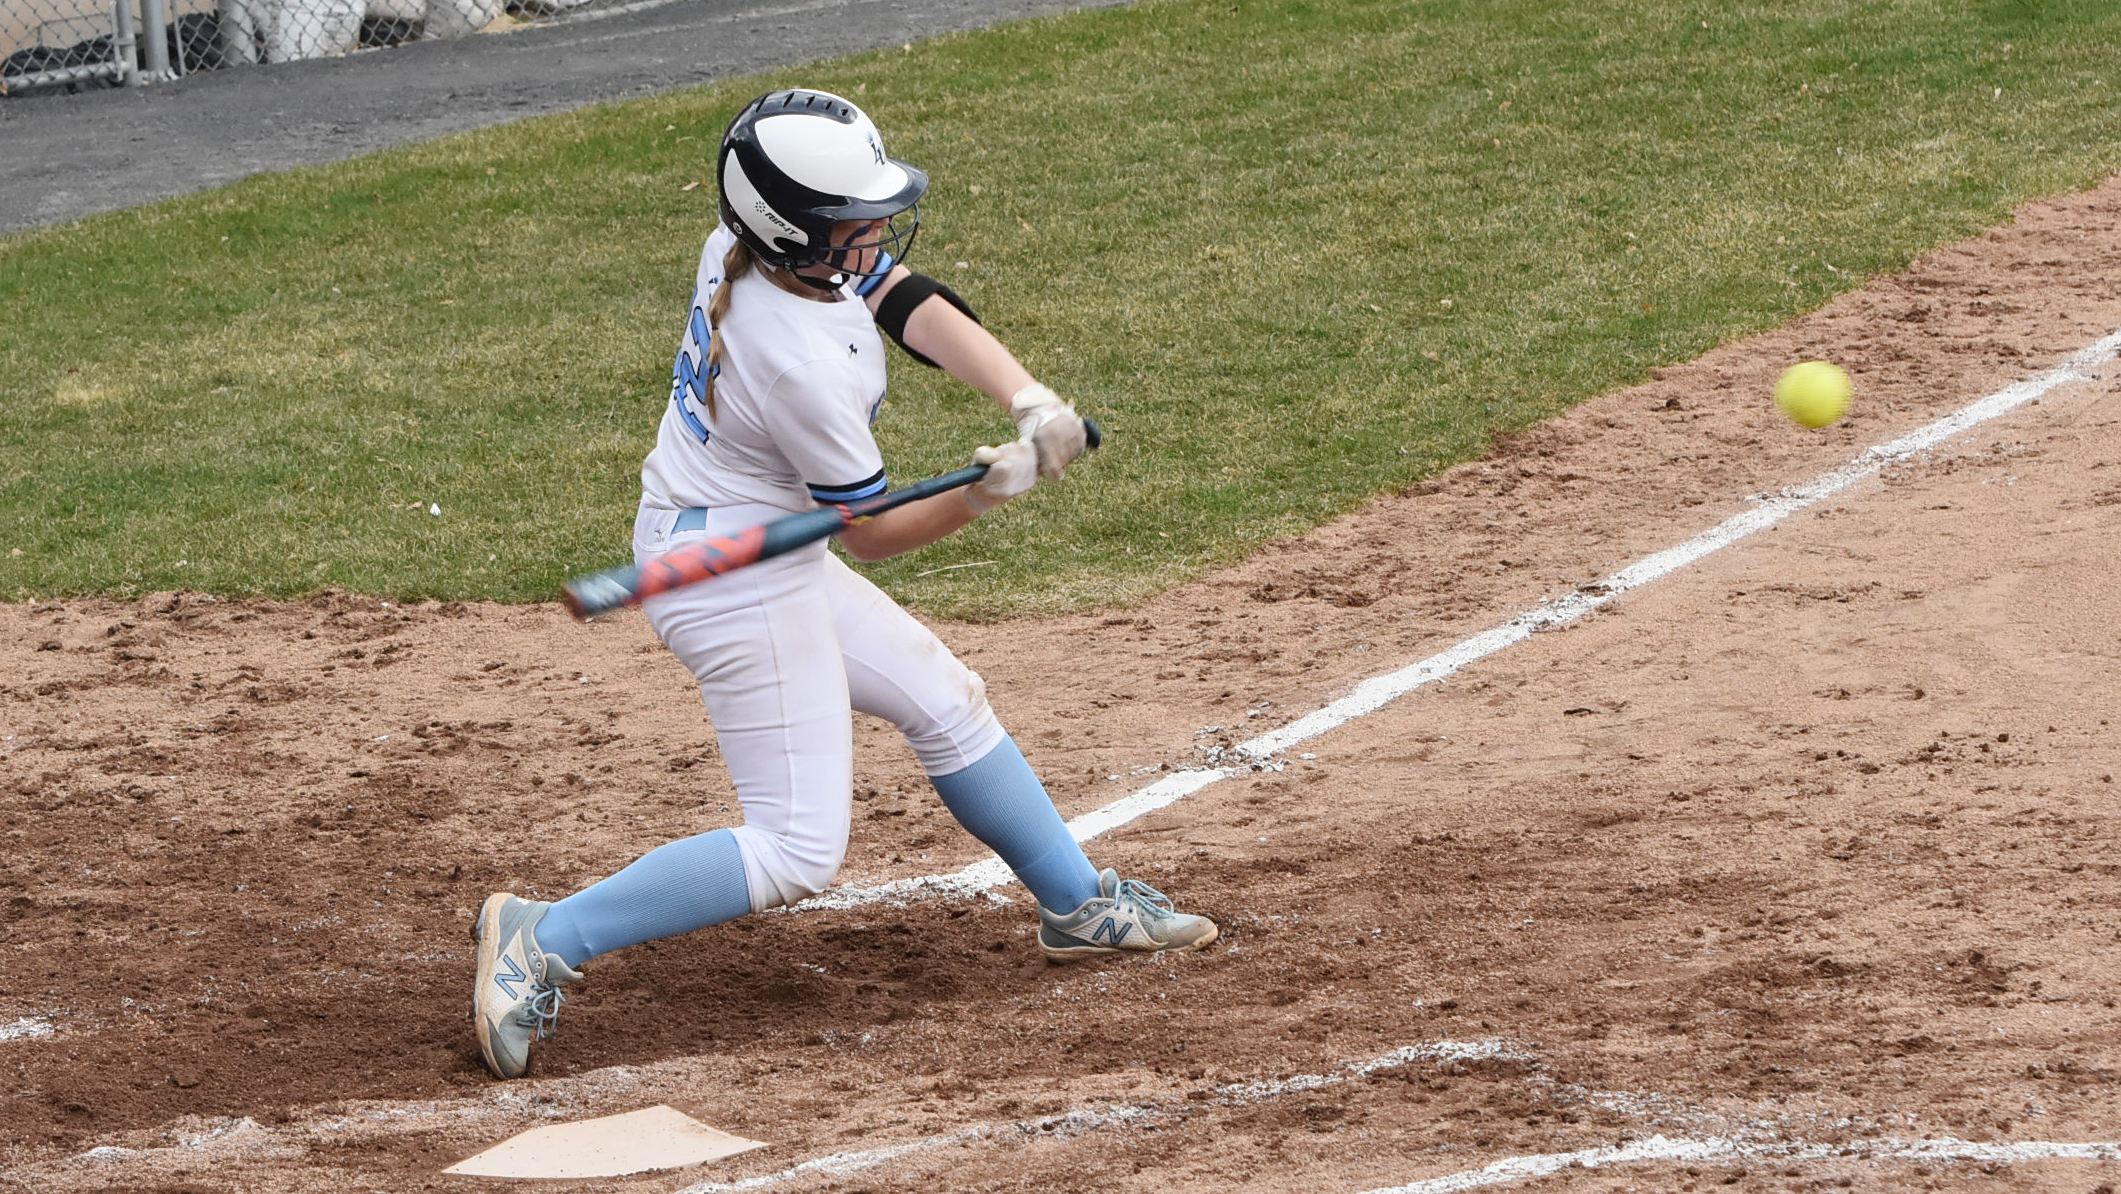 Softball: Strong game one pitching and hitting lead Lasell to doubleheader split with Salem State